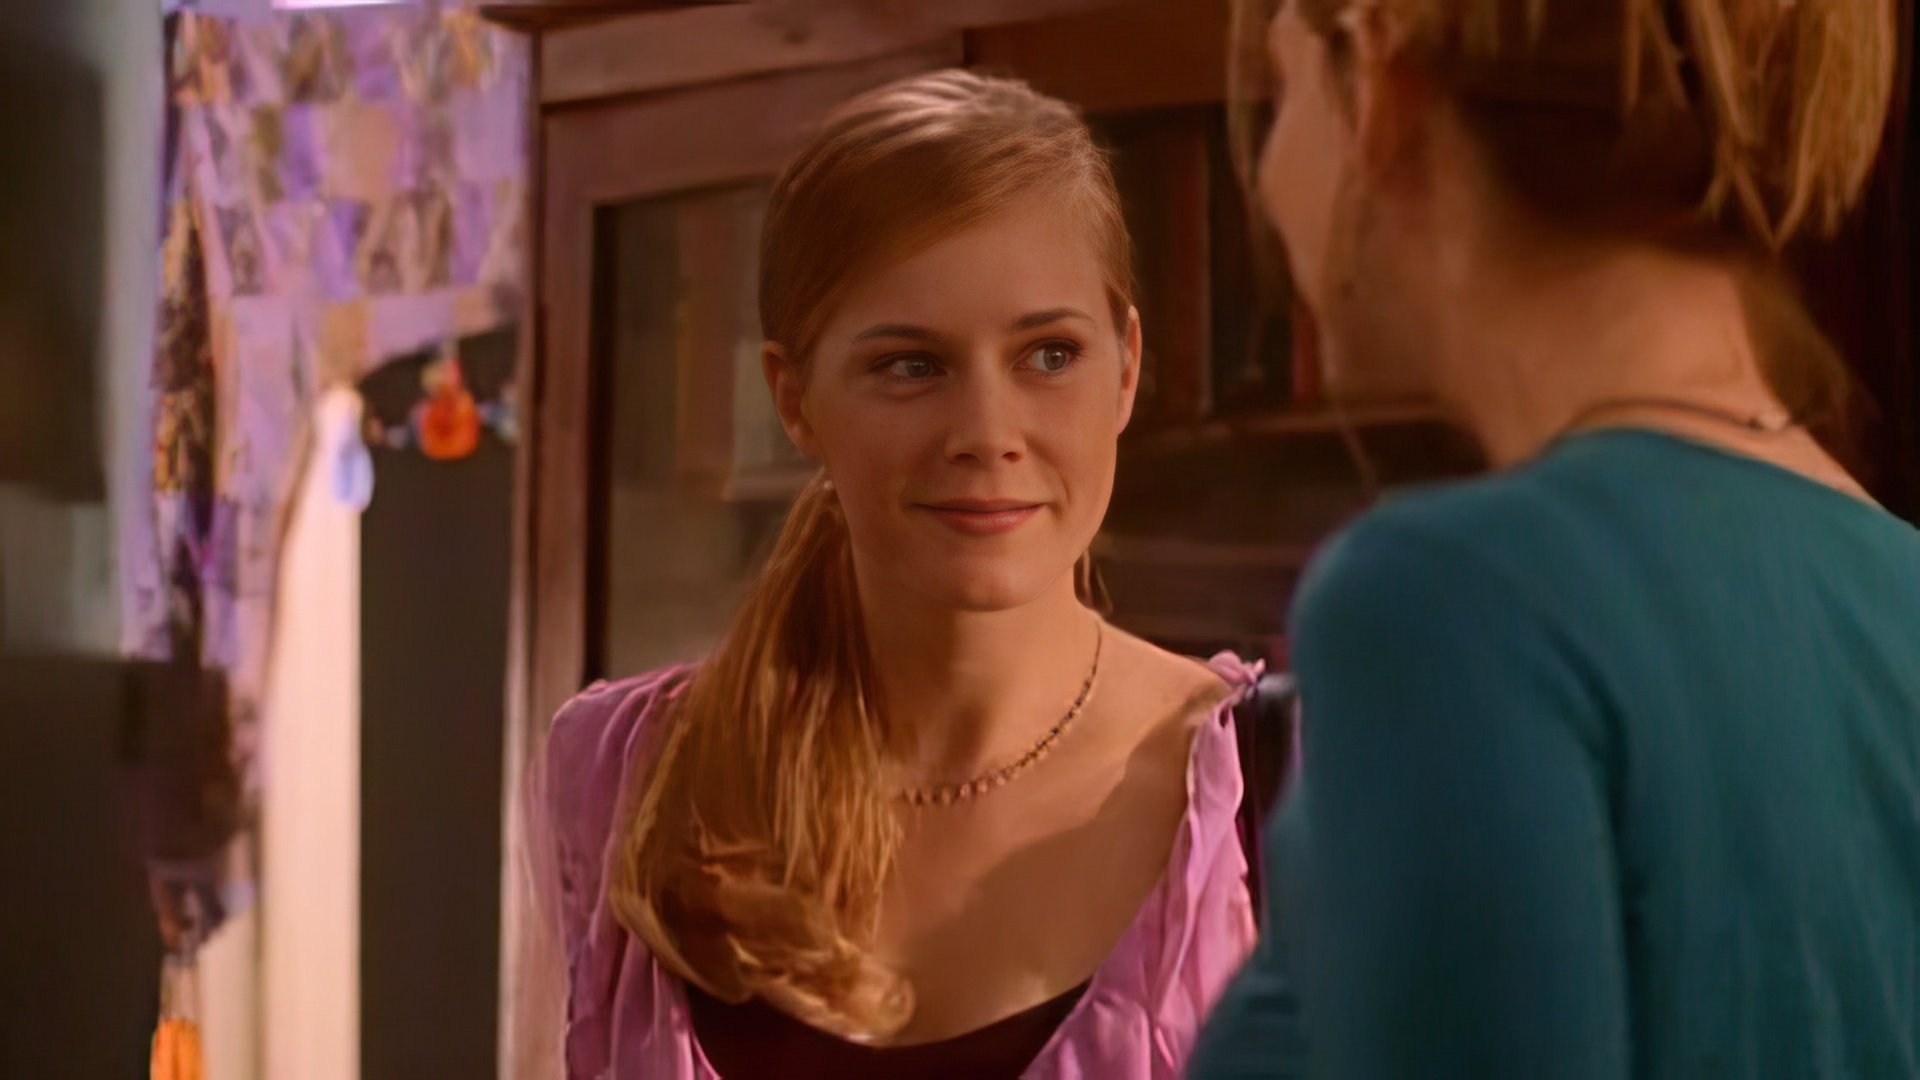 In her youth, Amy Adams starred in the popular TV series «Buffy the Vampire Slayer»